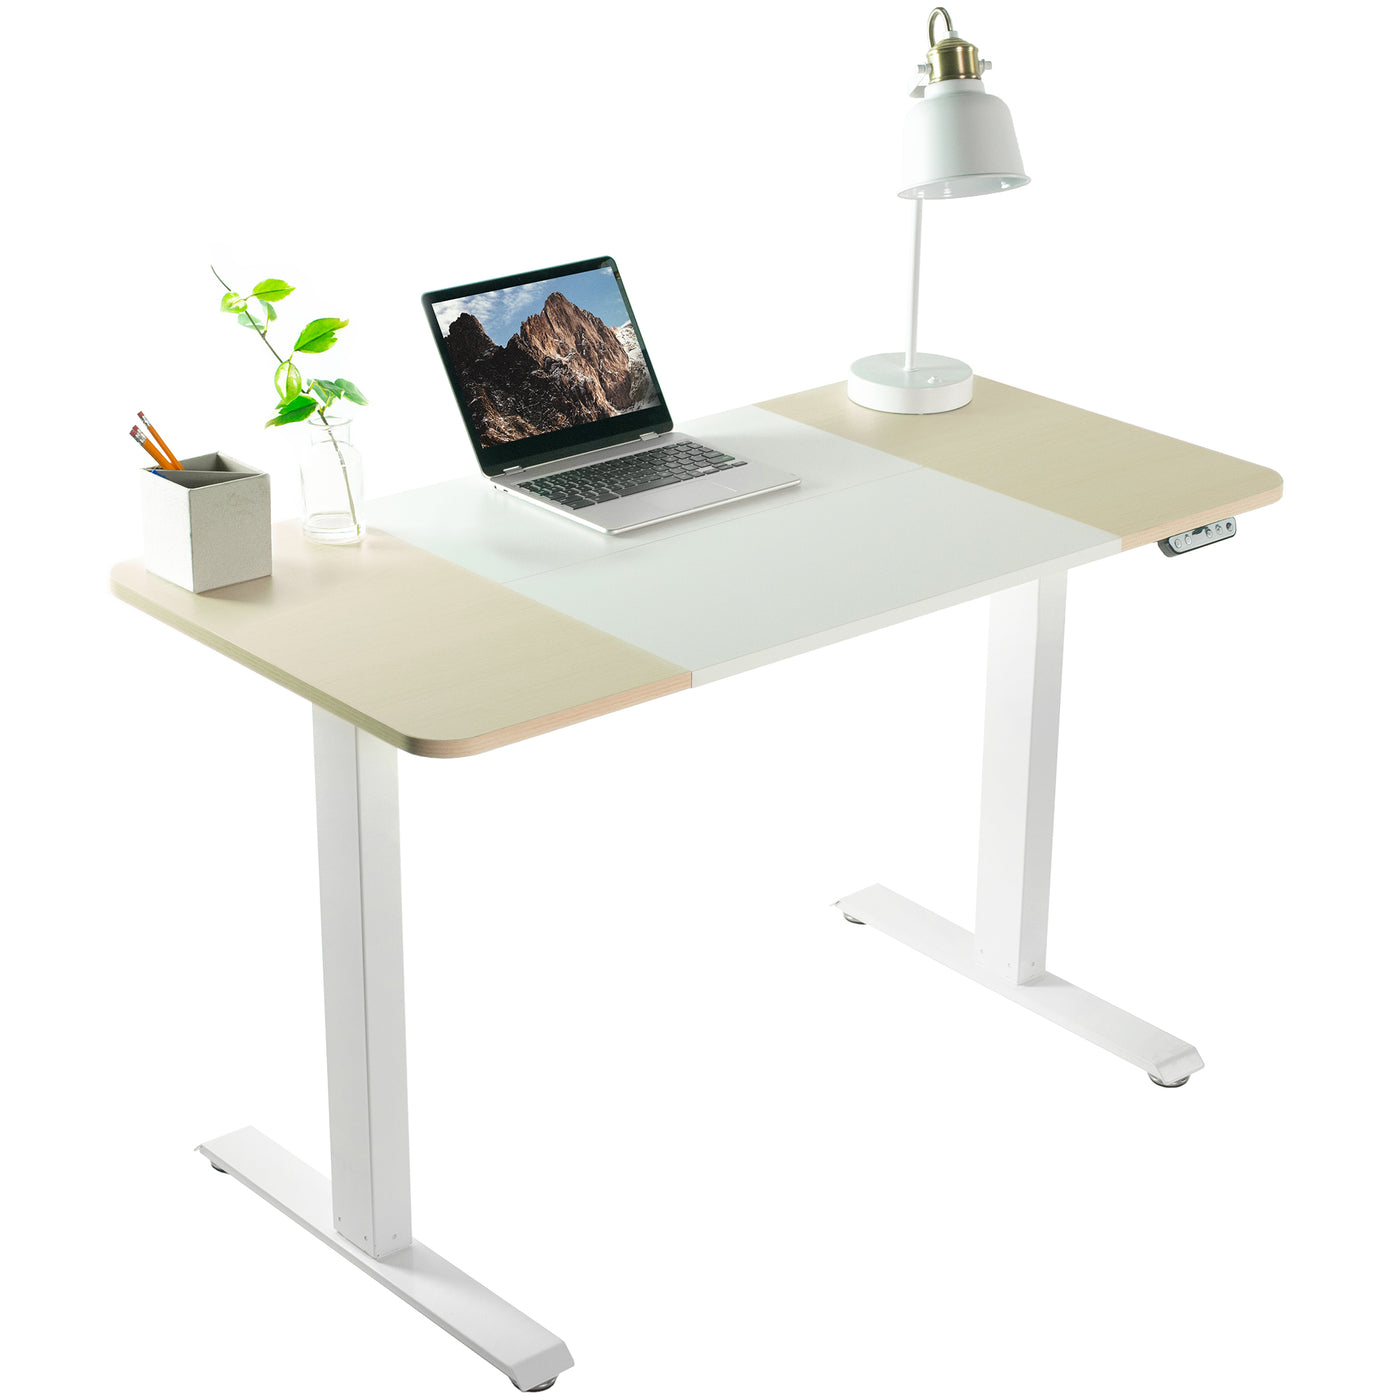 Sturdy electric sit or stand desk workstation with adjustable height.